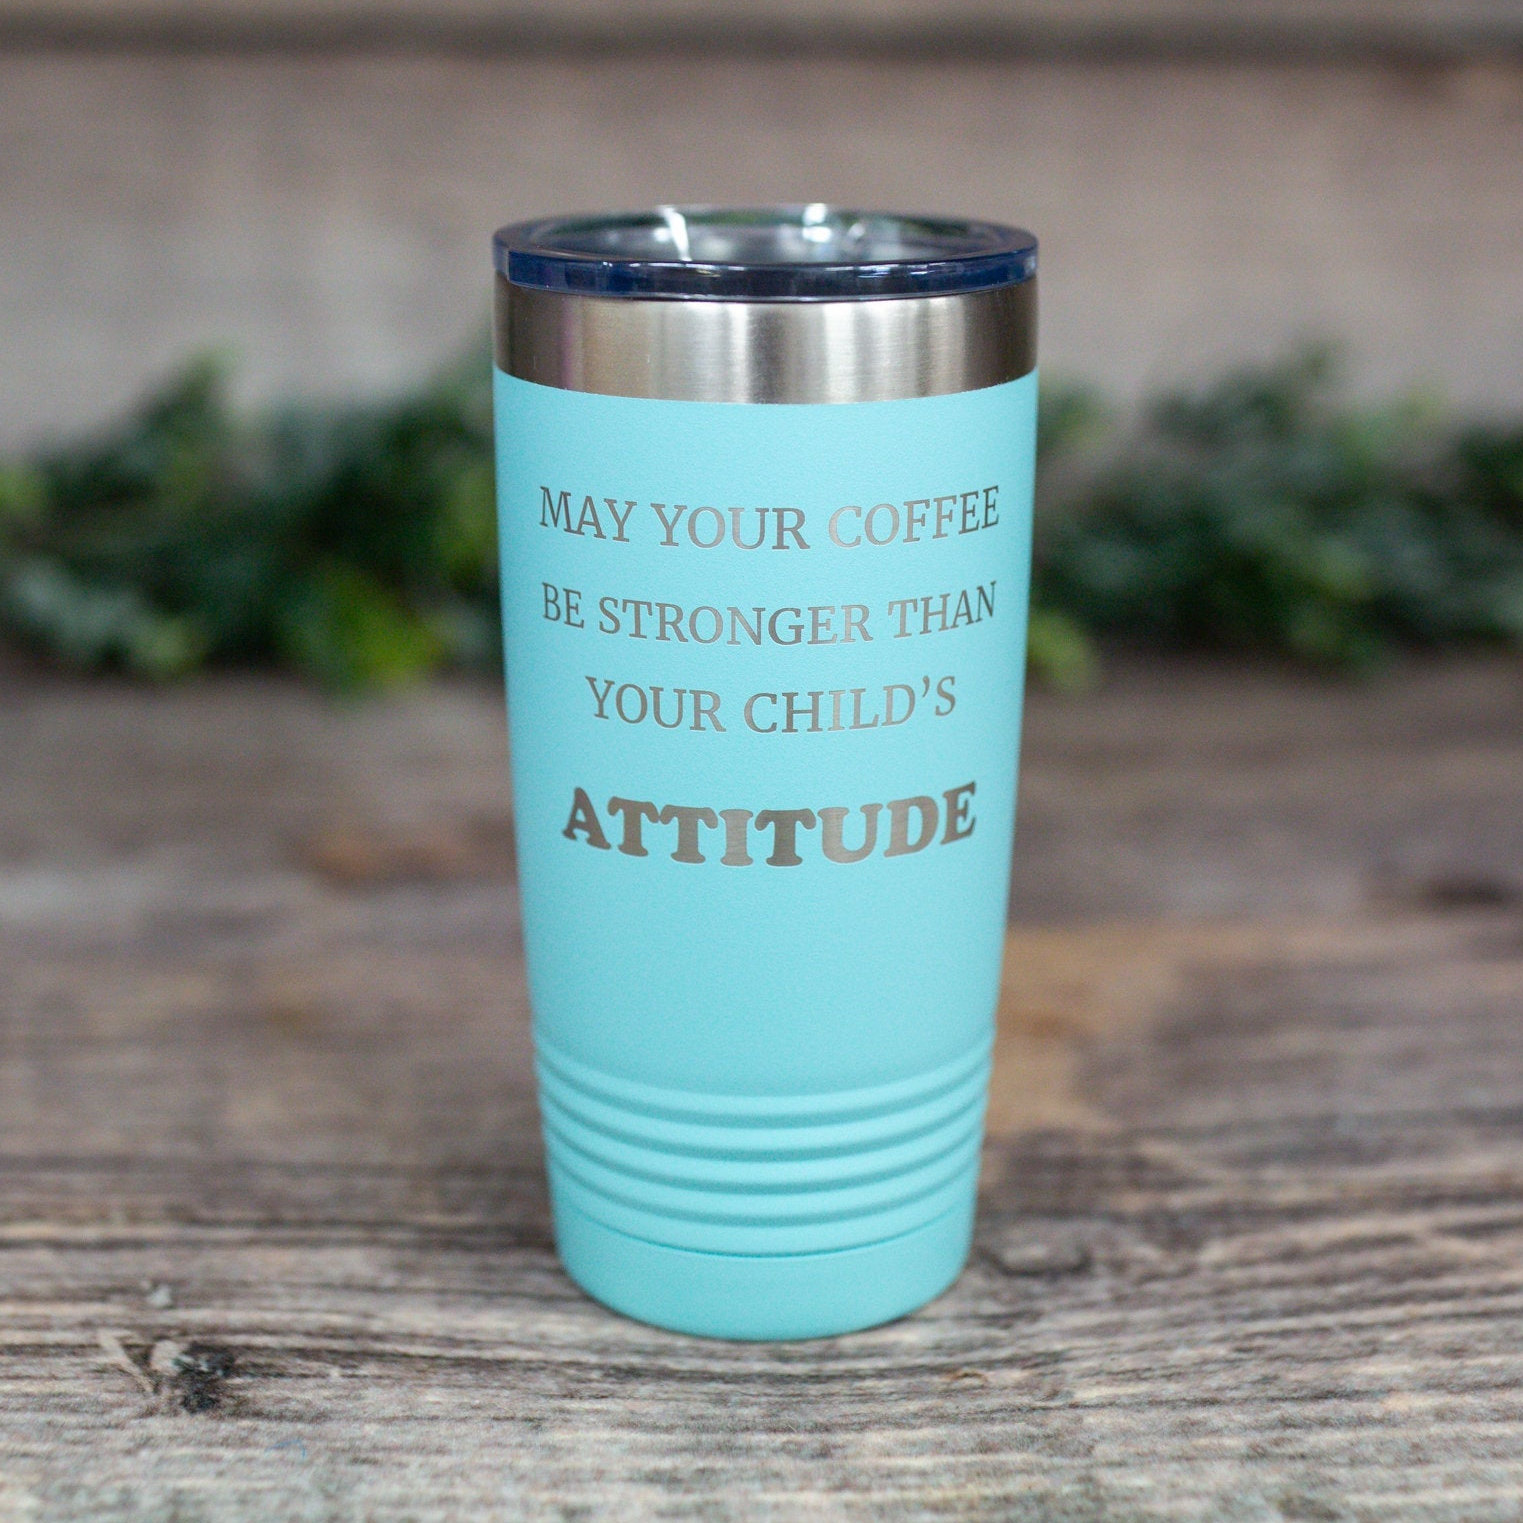 https://3cetching.com/wp-content/uploads/2021/07/may-your-coffee-be-stronger-than-your-childs-attitude-engraved-stainless-steel-tumbler-funny-parent-gift-mom-tumbler-60f72ccb.jpg